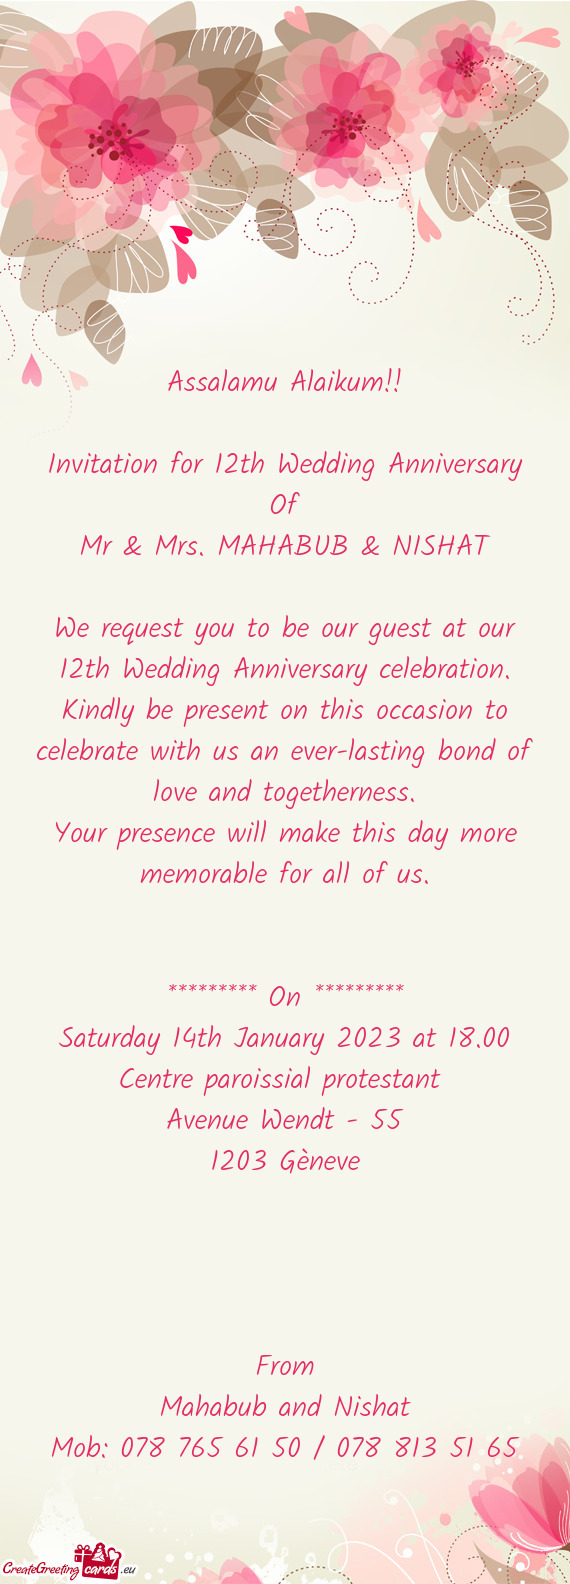 We request you to be our guest at our 12th Wedding Anniversary celebration